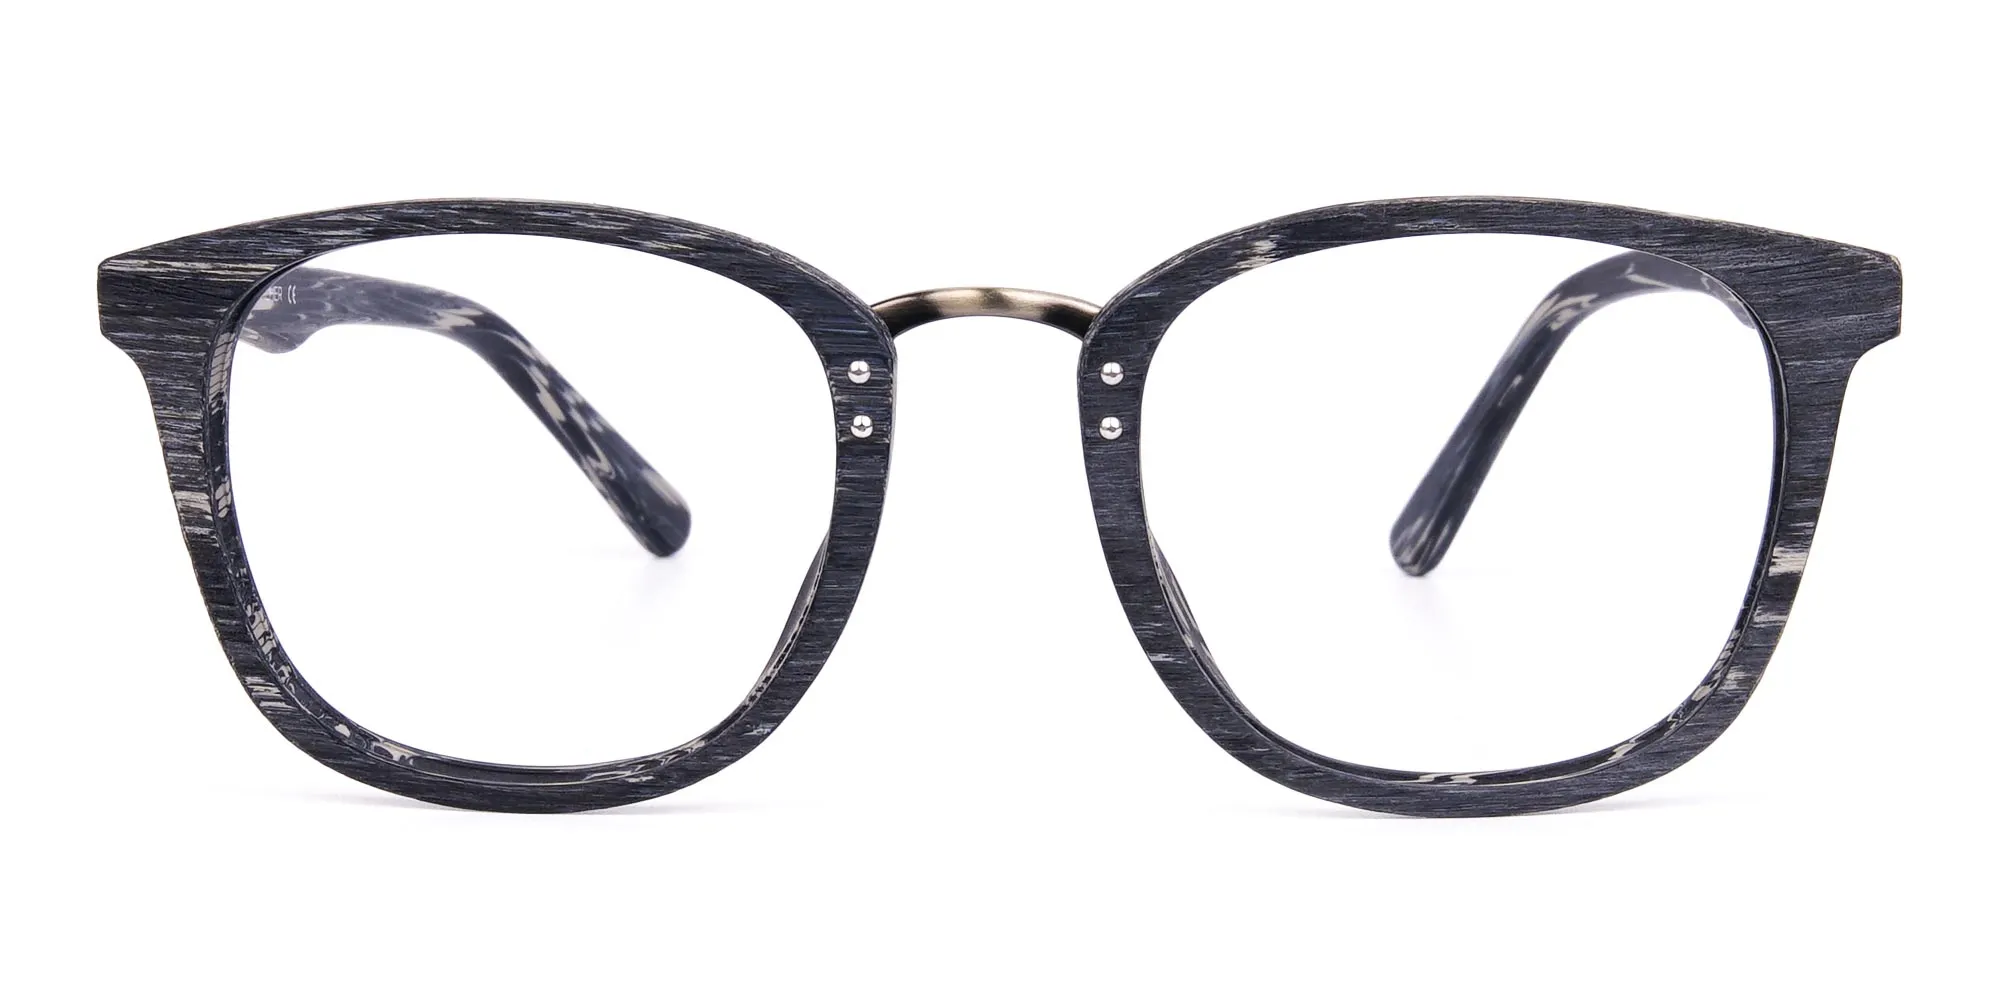 Wooden Spectacle Frames